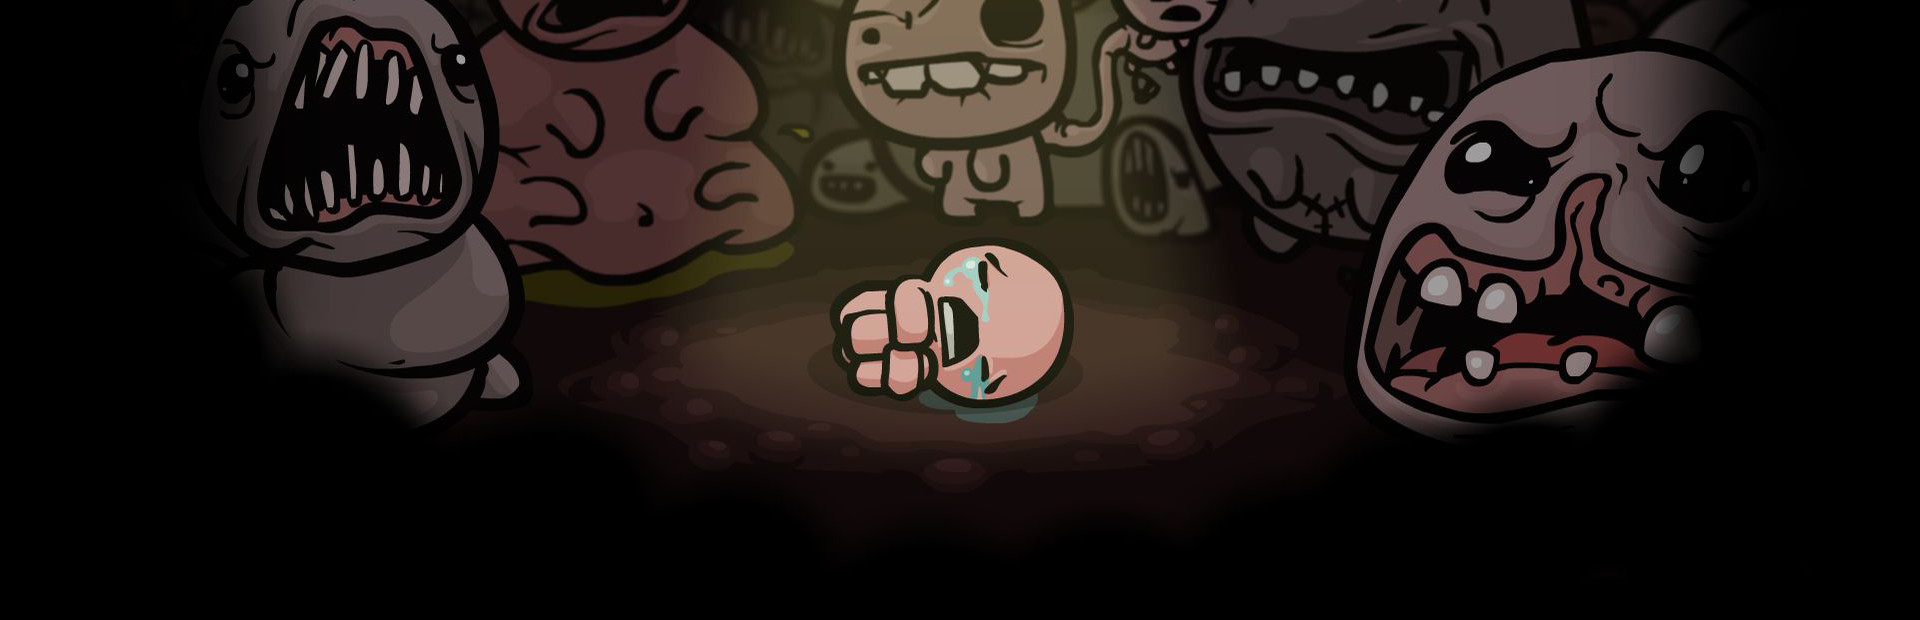 The Binding of Isaac cover image